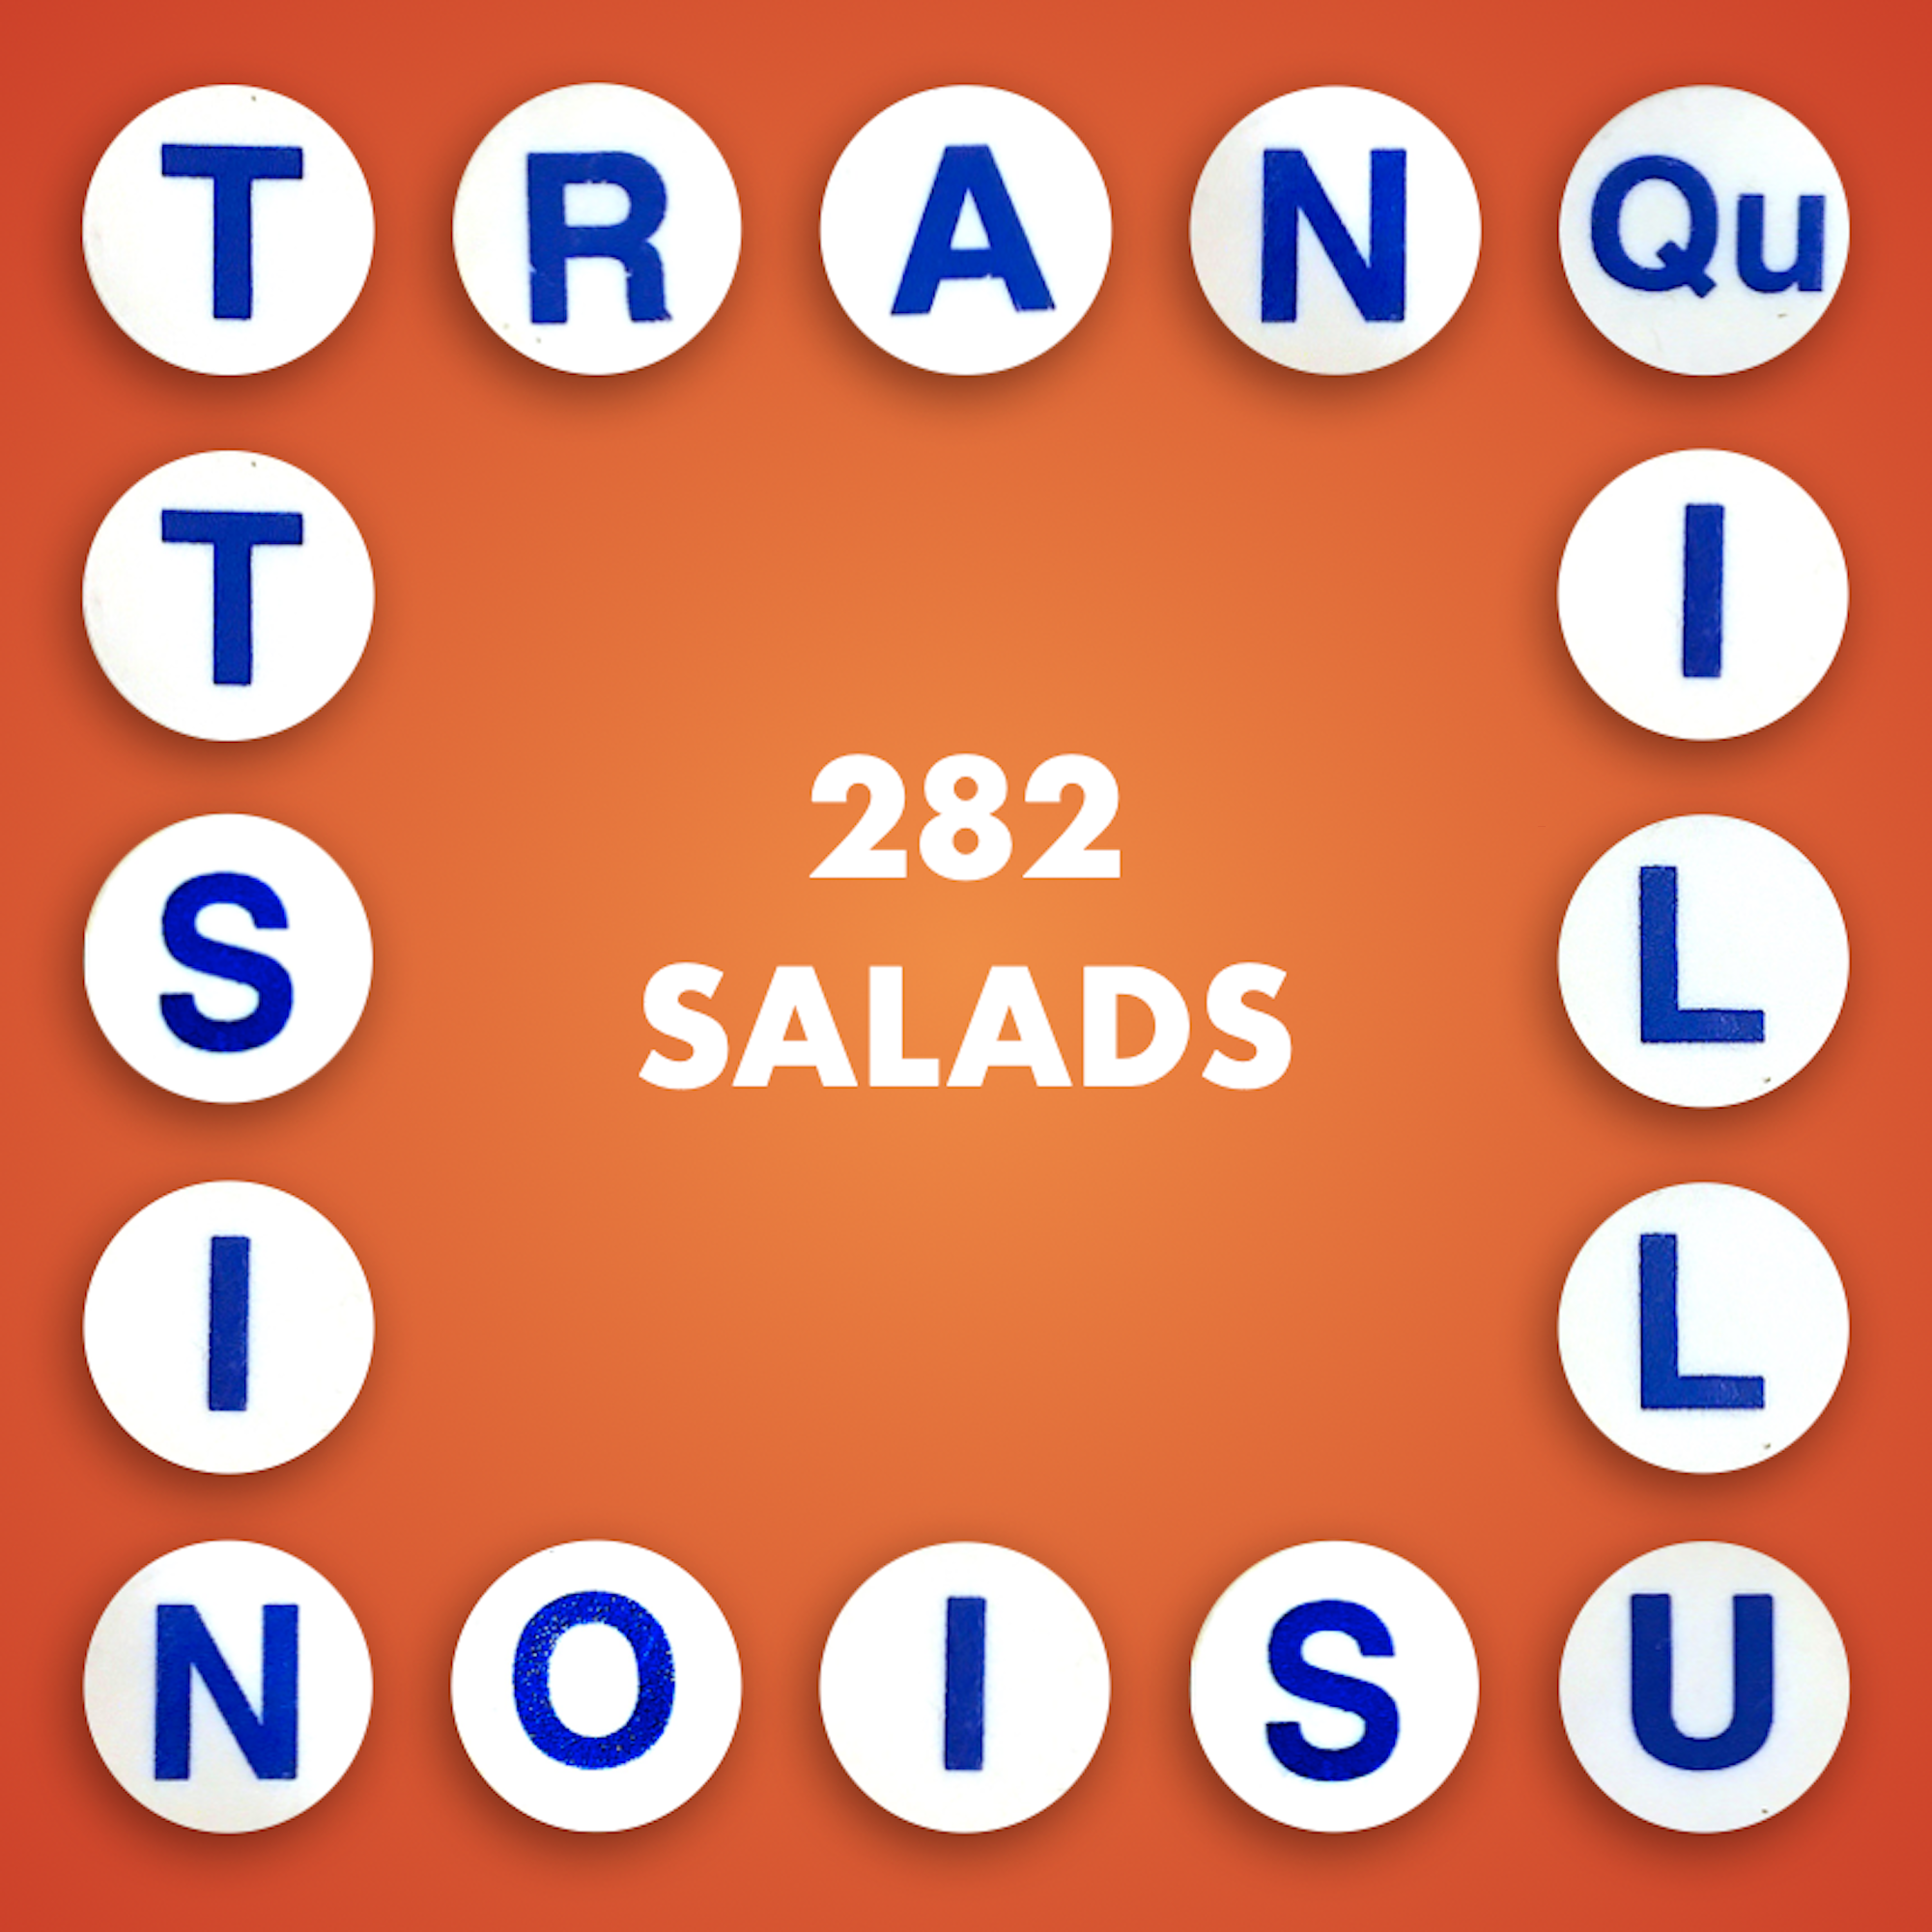 Thumbnail for "Tranquillusionist: 282 Salads".